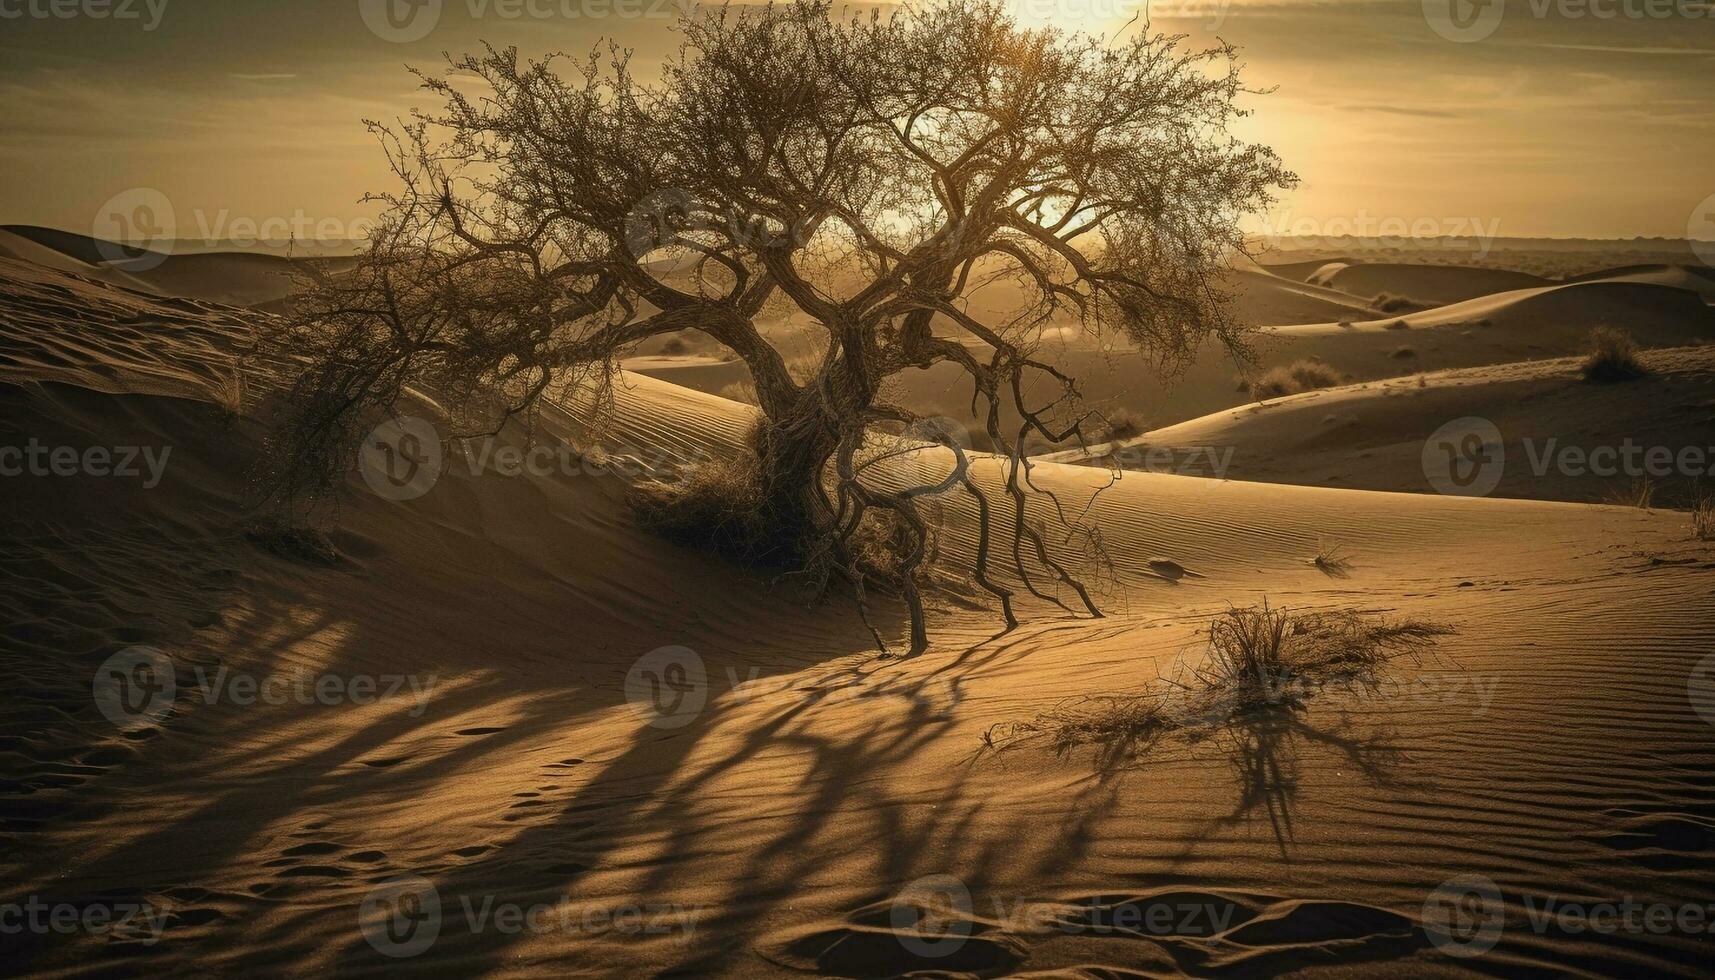 Rippled sand dunes pattern the arid landscape generated by AI photo